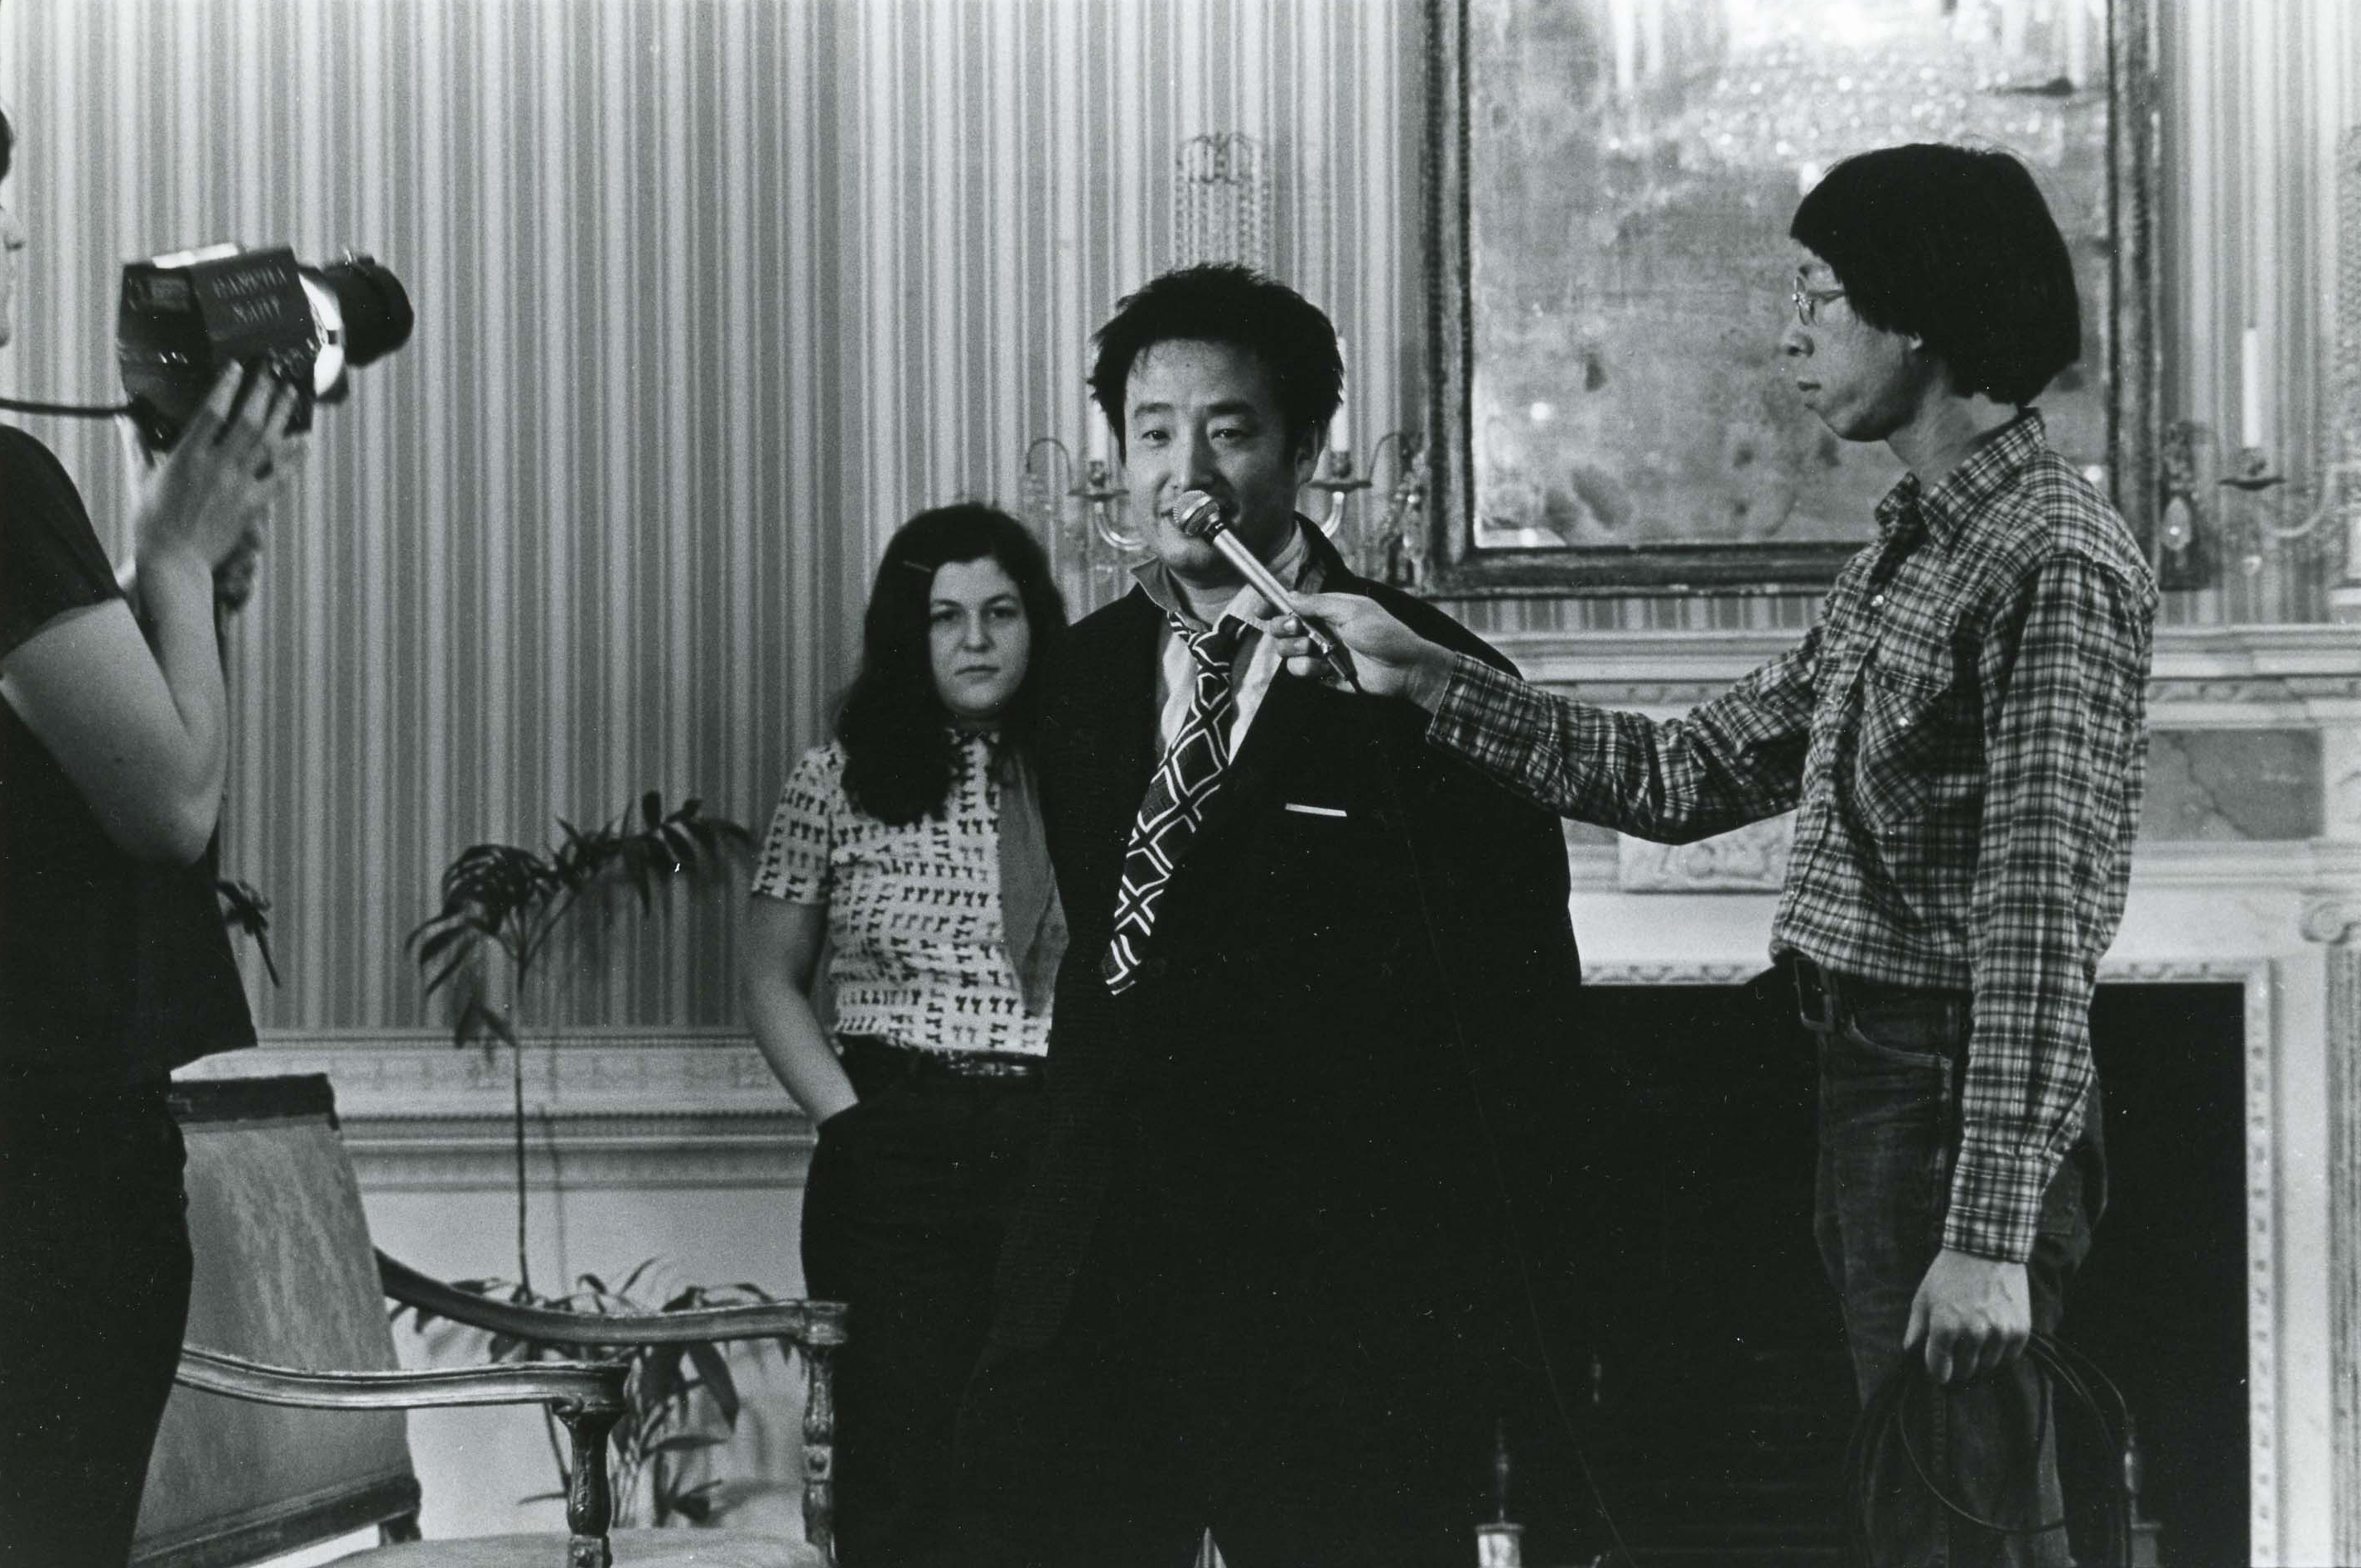 Nam June Paik in 'Rameau's Nephew' by Diderot (Thanx to Dennis Young) by Wilma Schoen by Michael Snow, 1974.